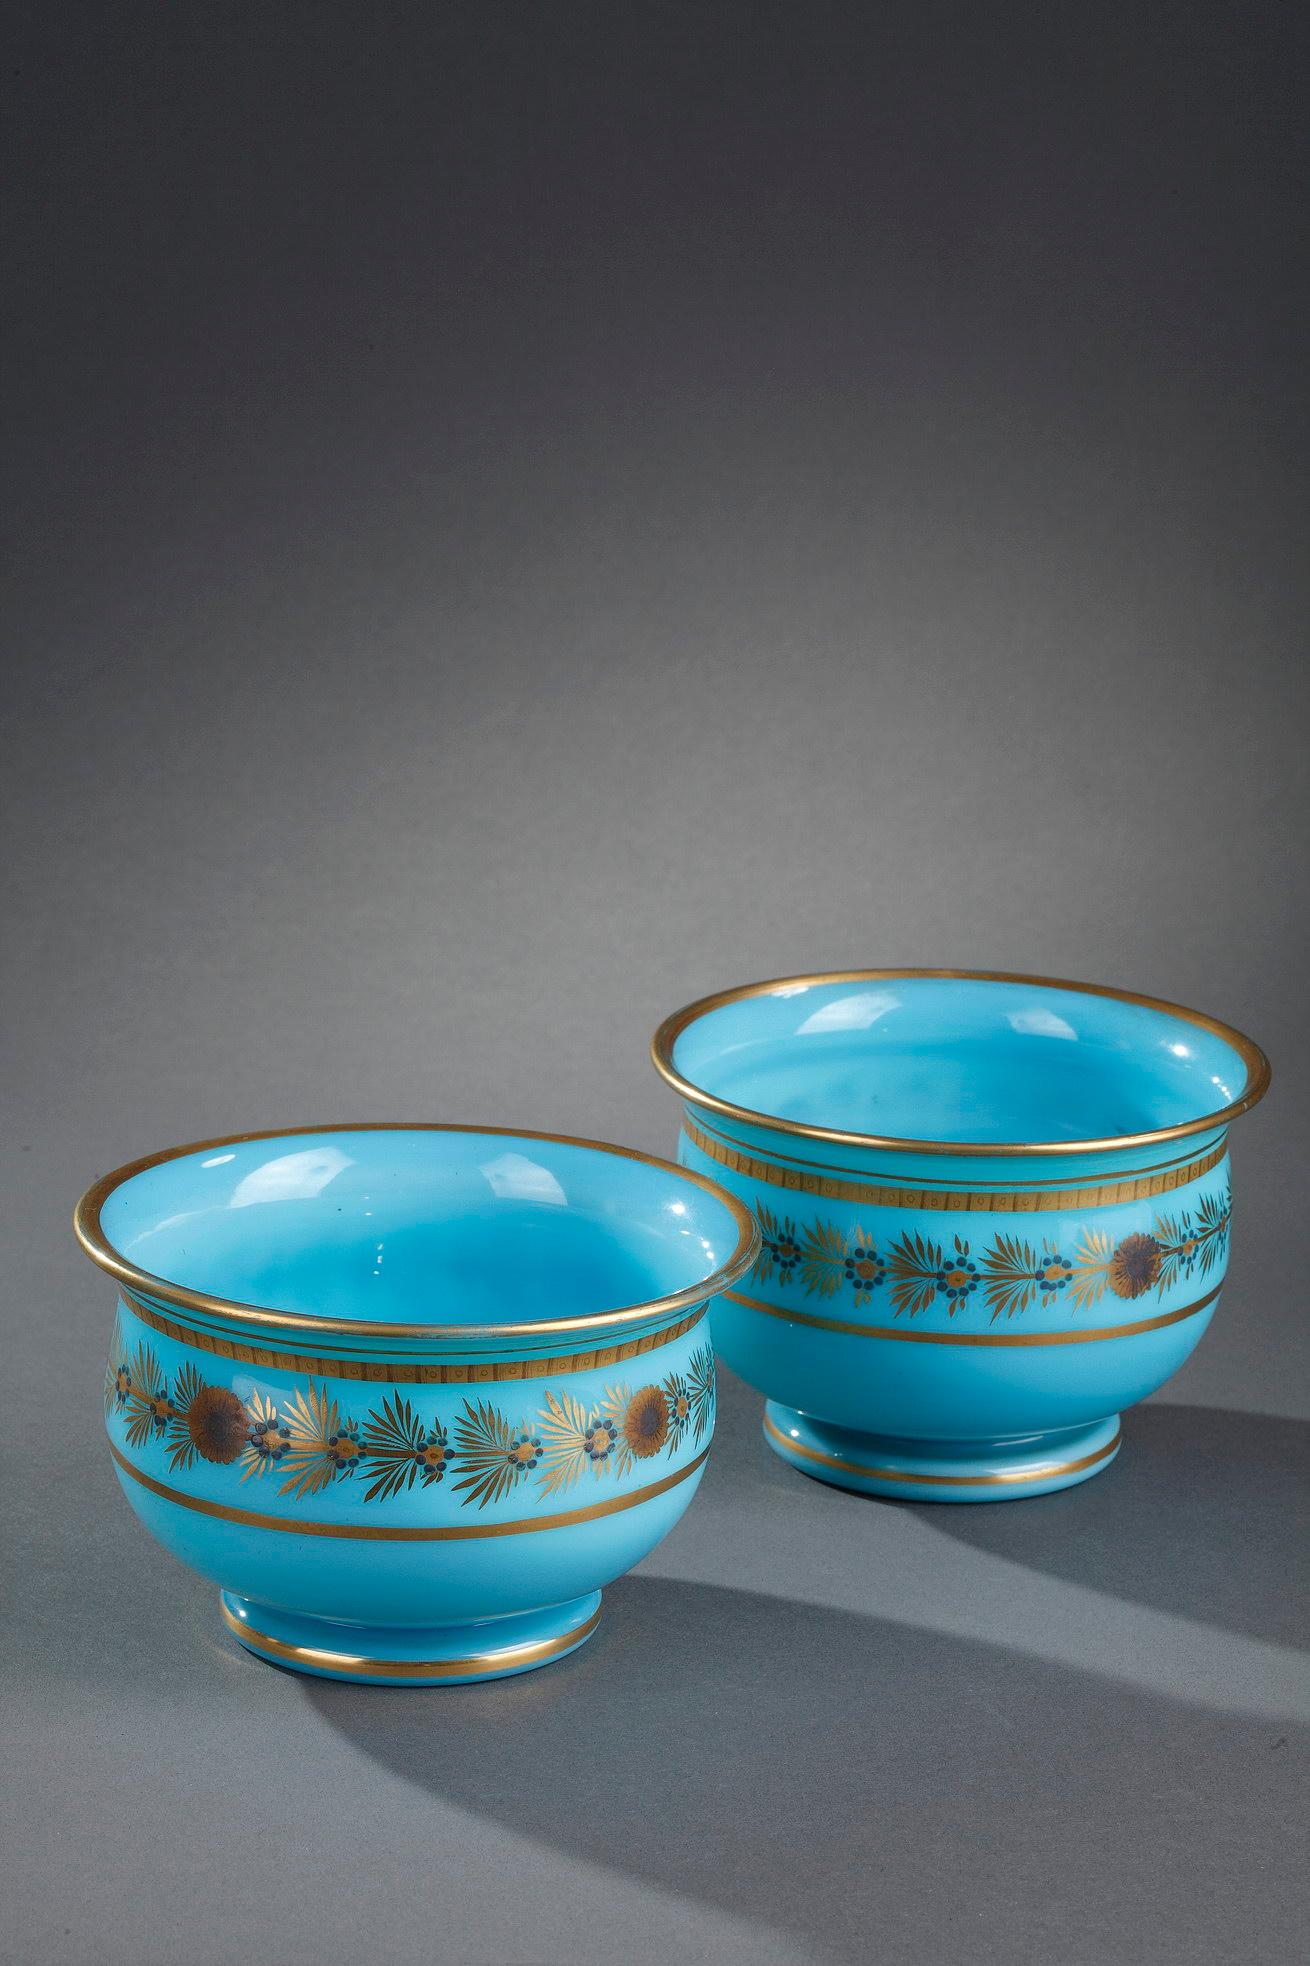 A pair of blue opaline bowls decorated with a frieze of daisies and forget-me painted in dark blue, ocher and gold, and golden nets. The simplicity and subtlety of this pattern is representative of the production of Jean-Baptiste Desvignes, the most